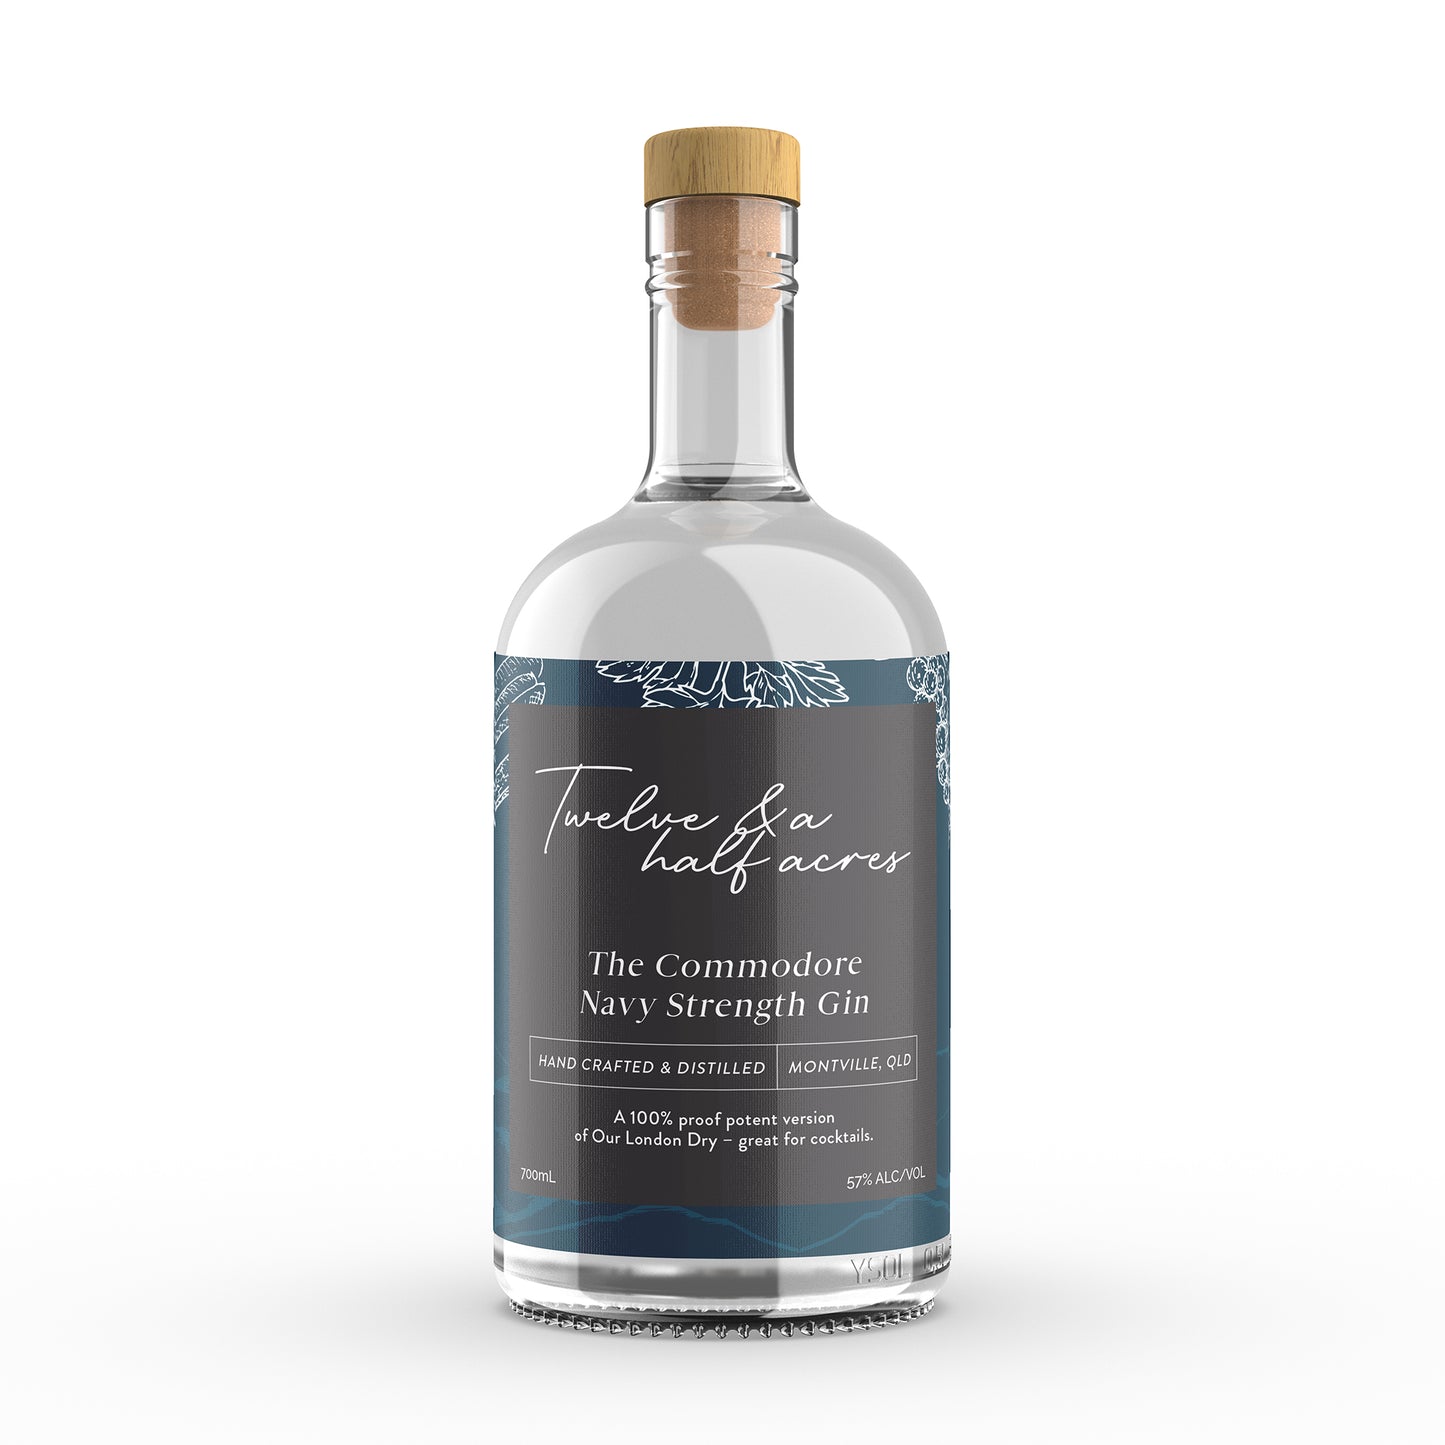 The Commodore Navy Strength Gin